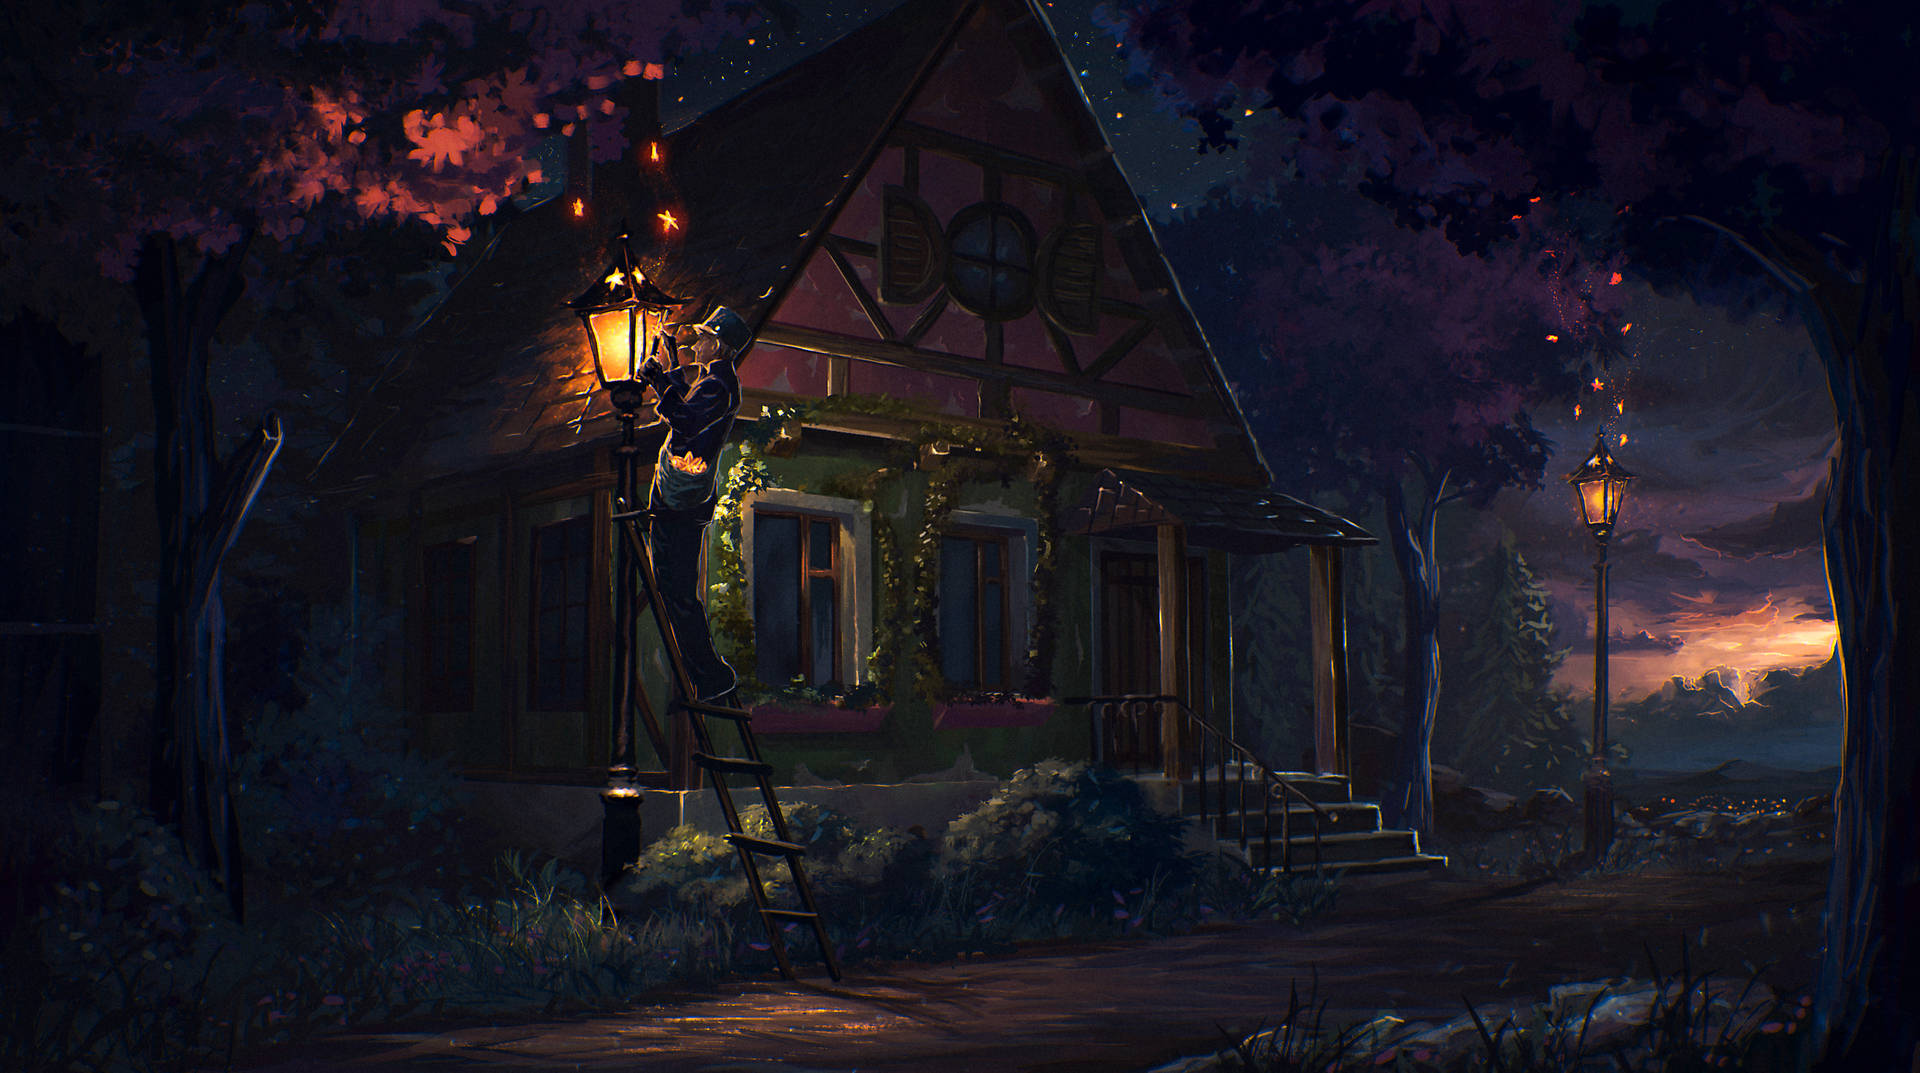 Fairy House At Night Wallpaper